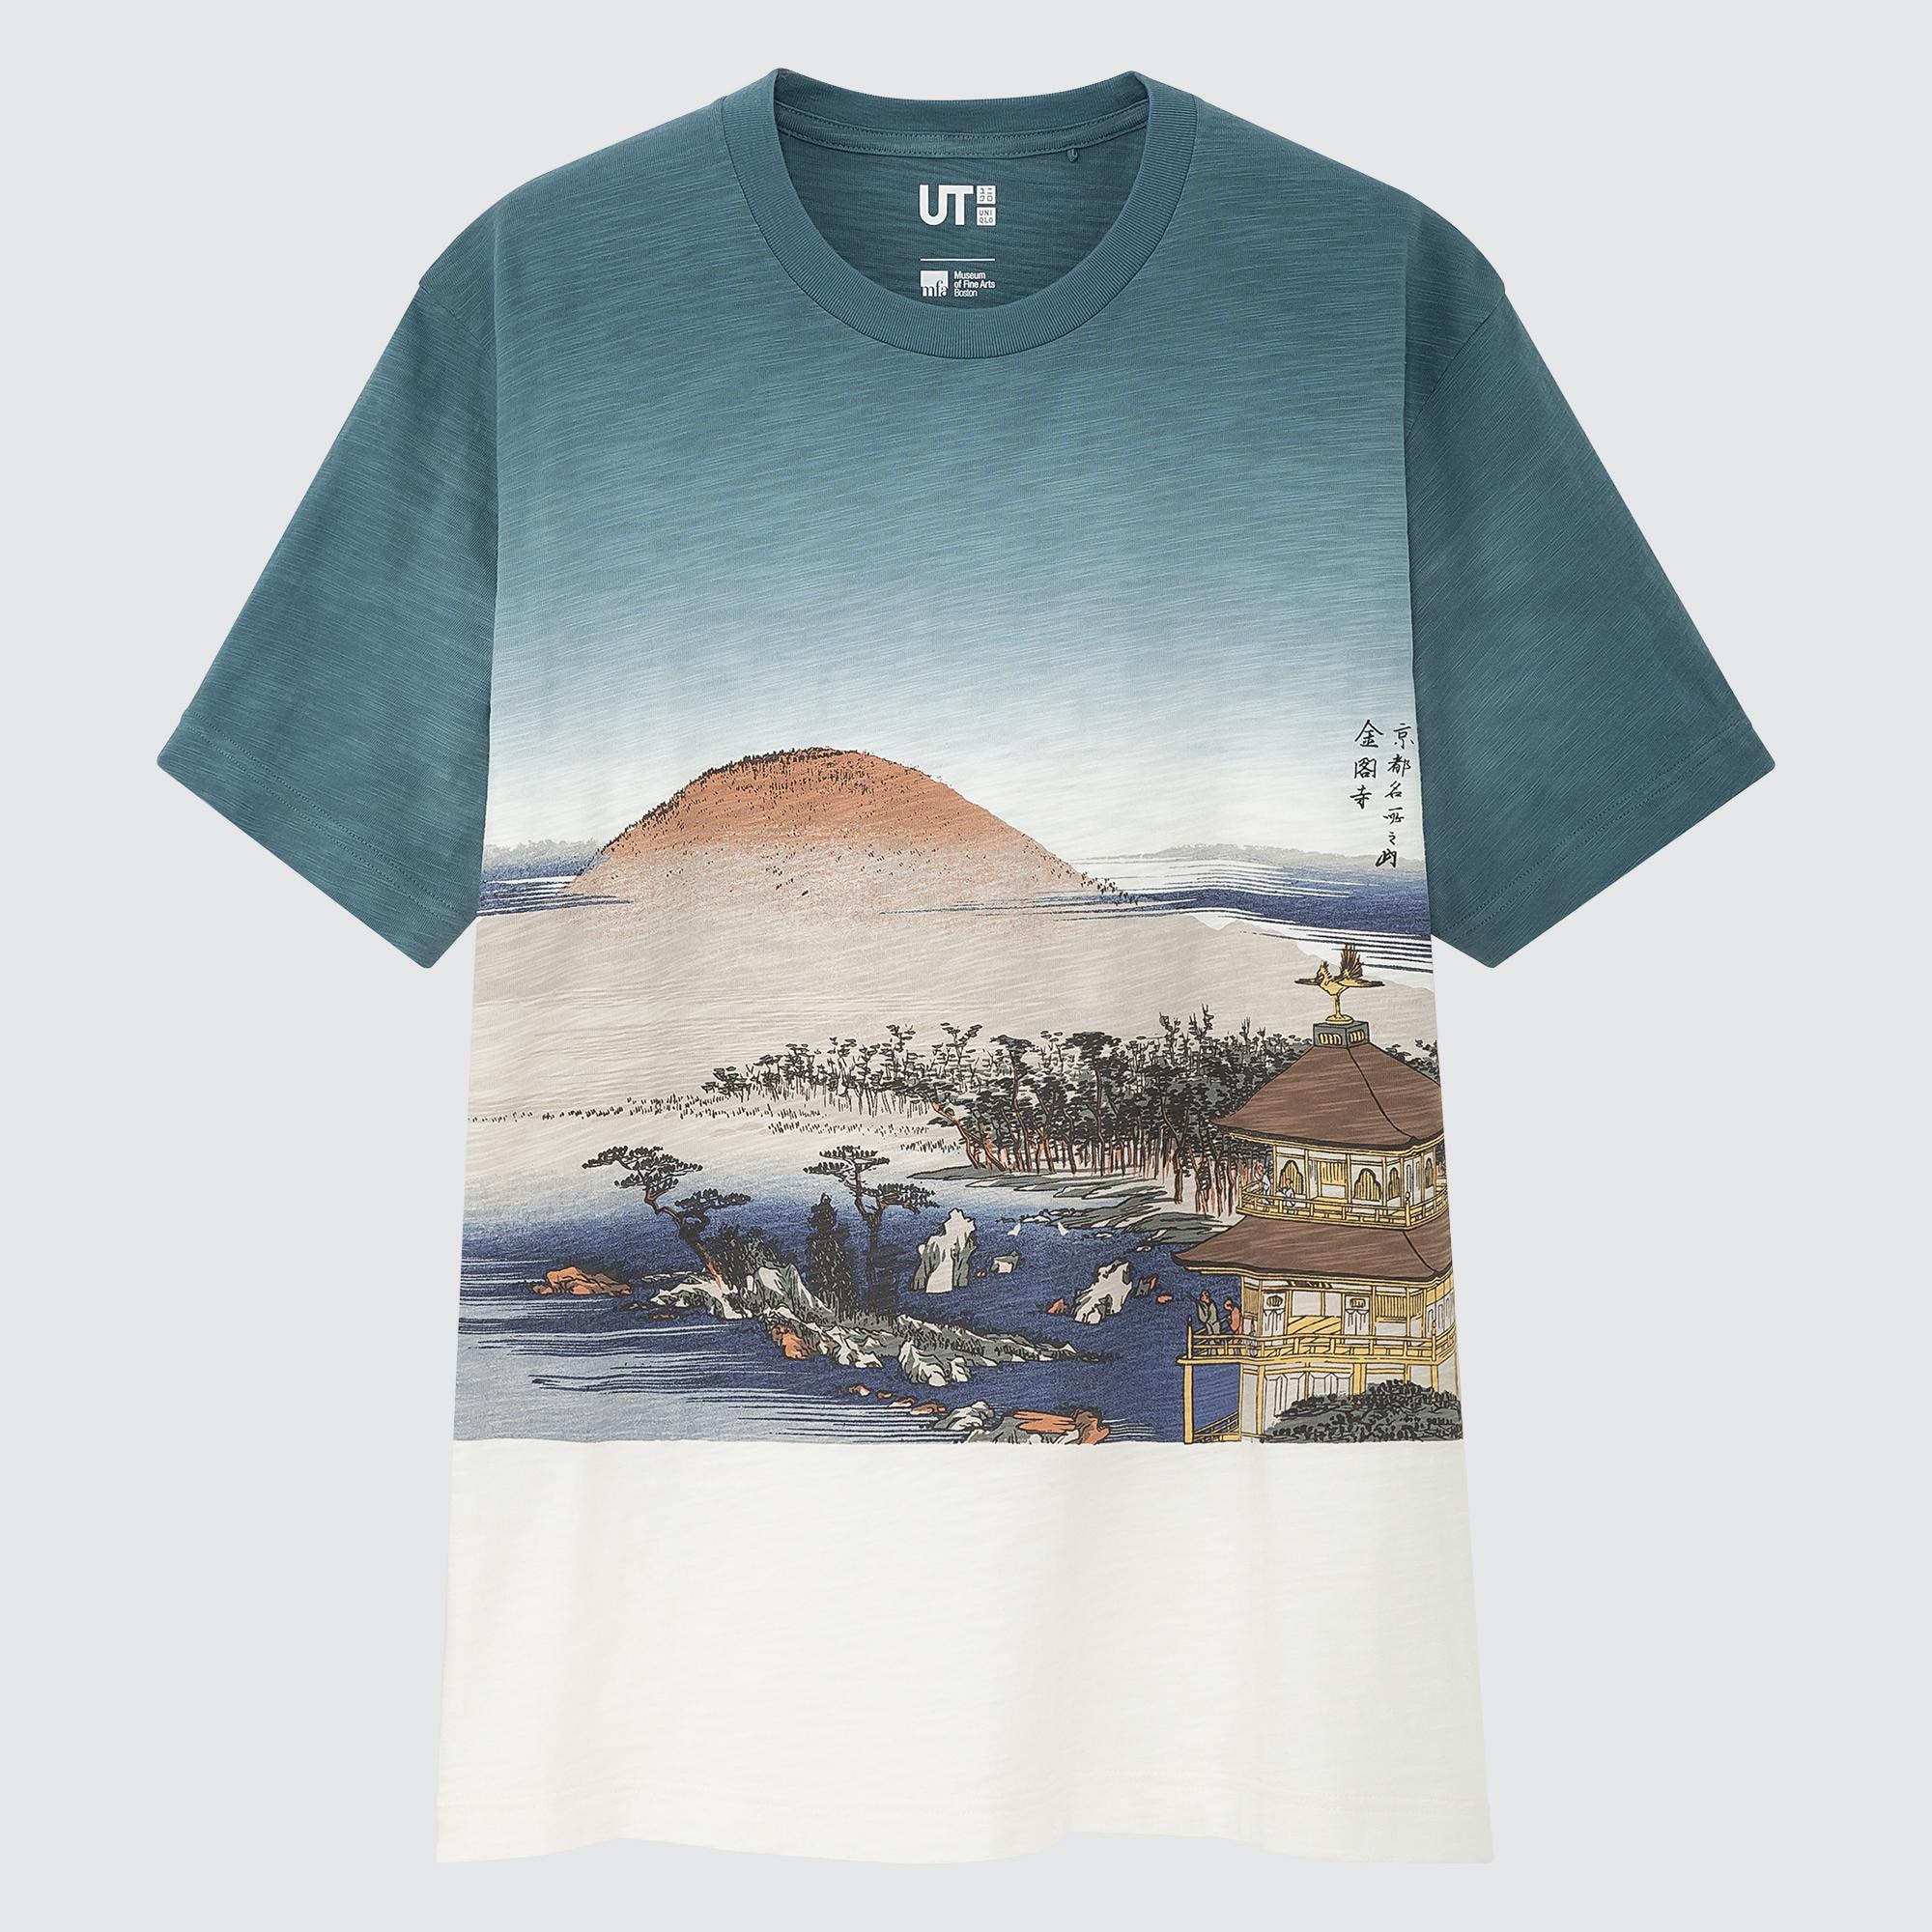 Uniqlo Pokémon Tshirts coming to Japan this summer in 24 crazy designs   SoraNews24 Japan News